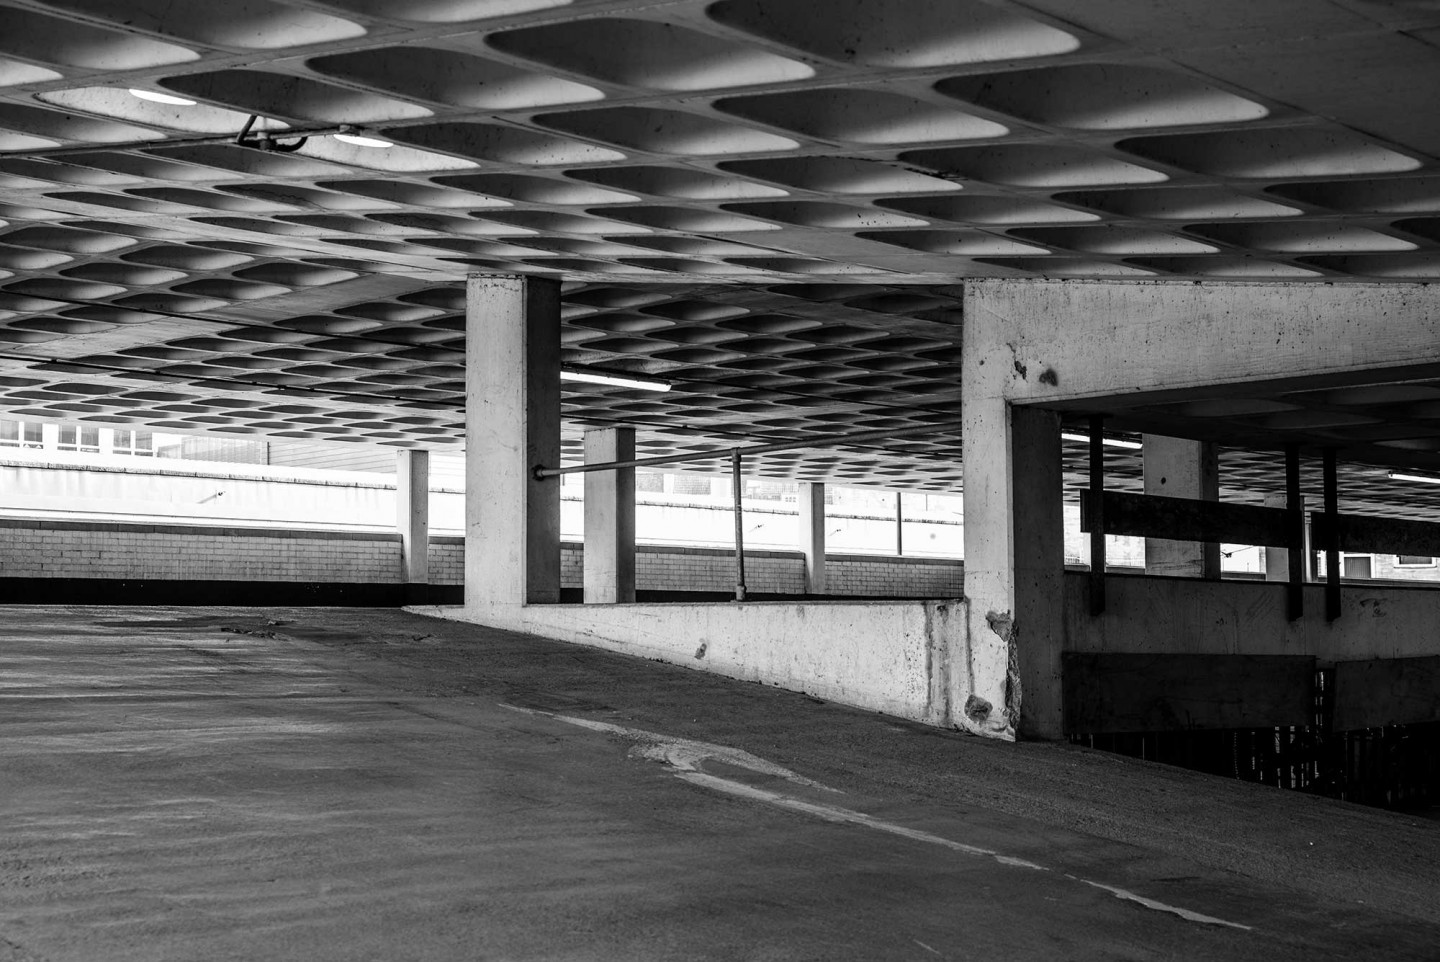 Taken in my home city of Bath. The usually very busy Avon Street multi-story car park was totally empty and deserted. © Mark Dunscombe